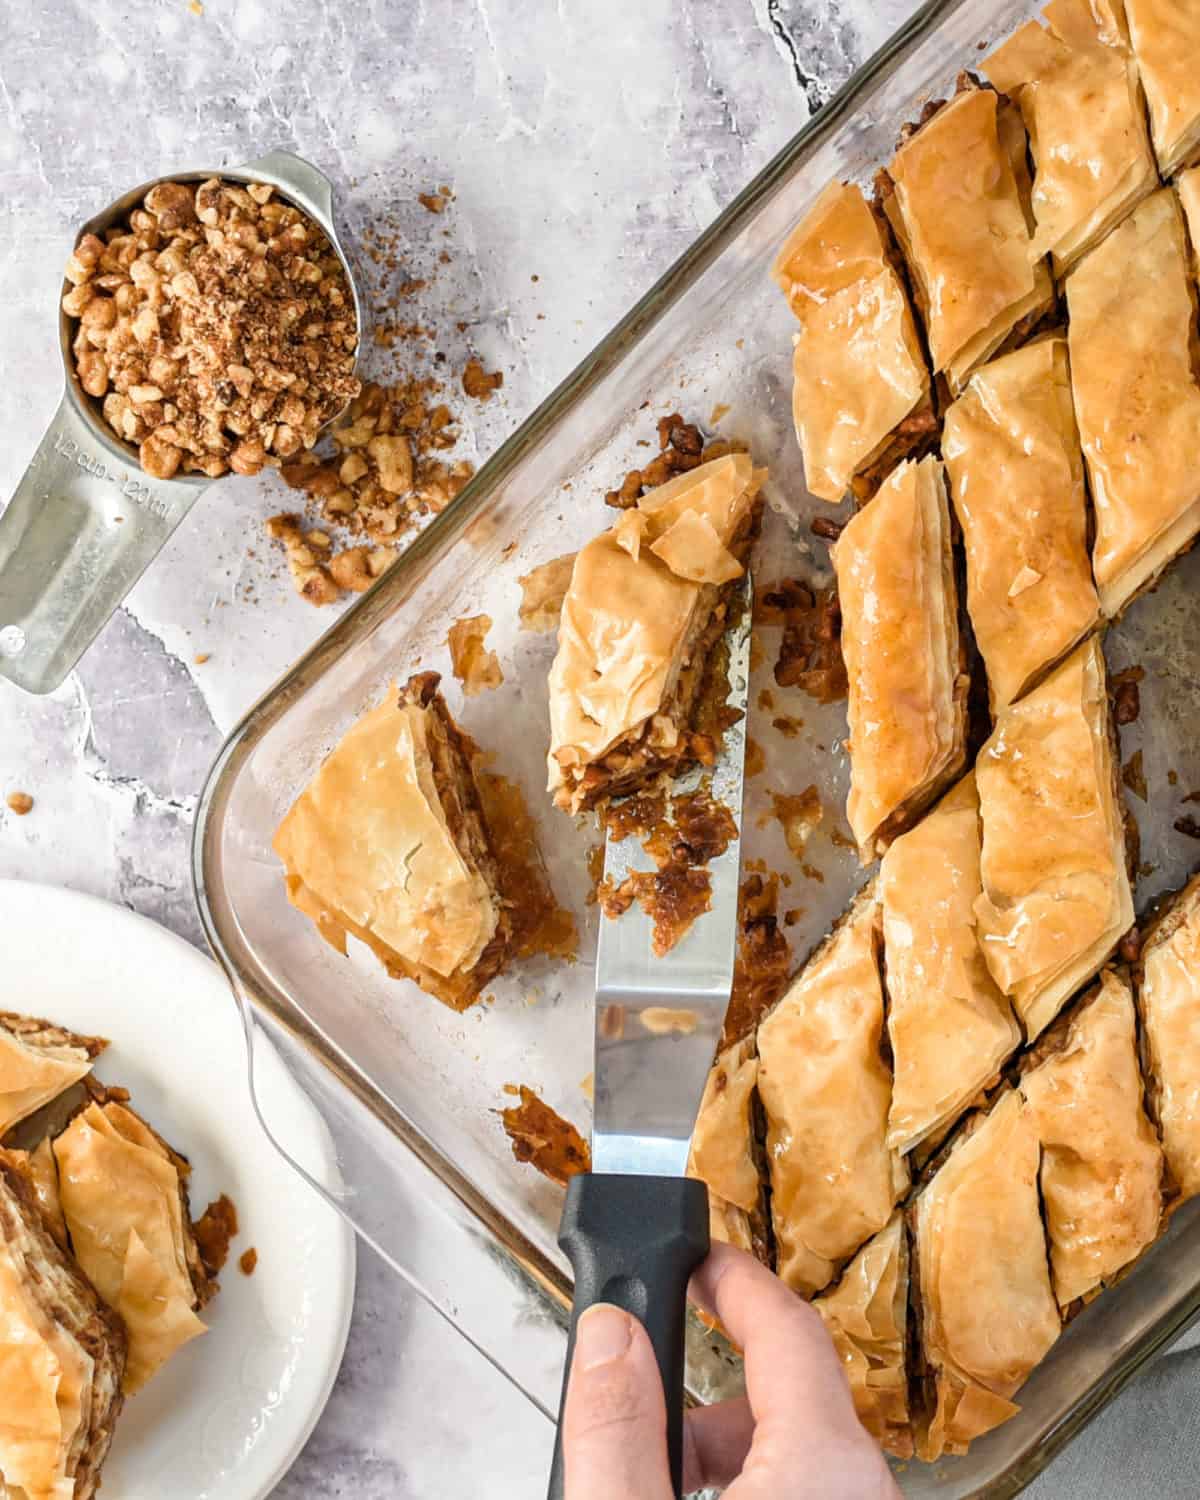 Serving baklava with a serving knife from the baking dish.